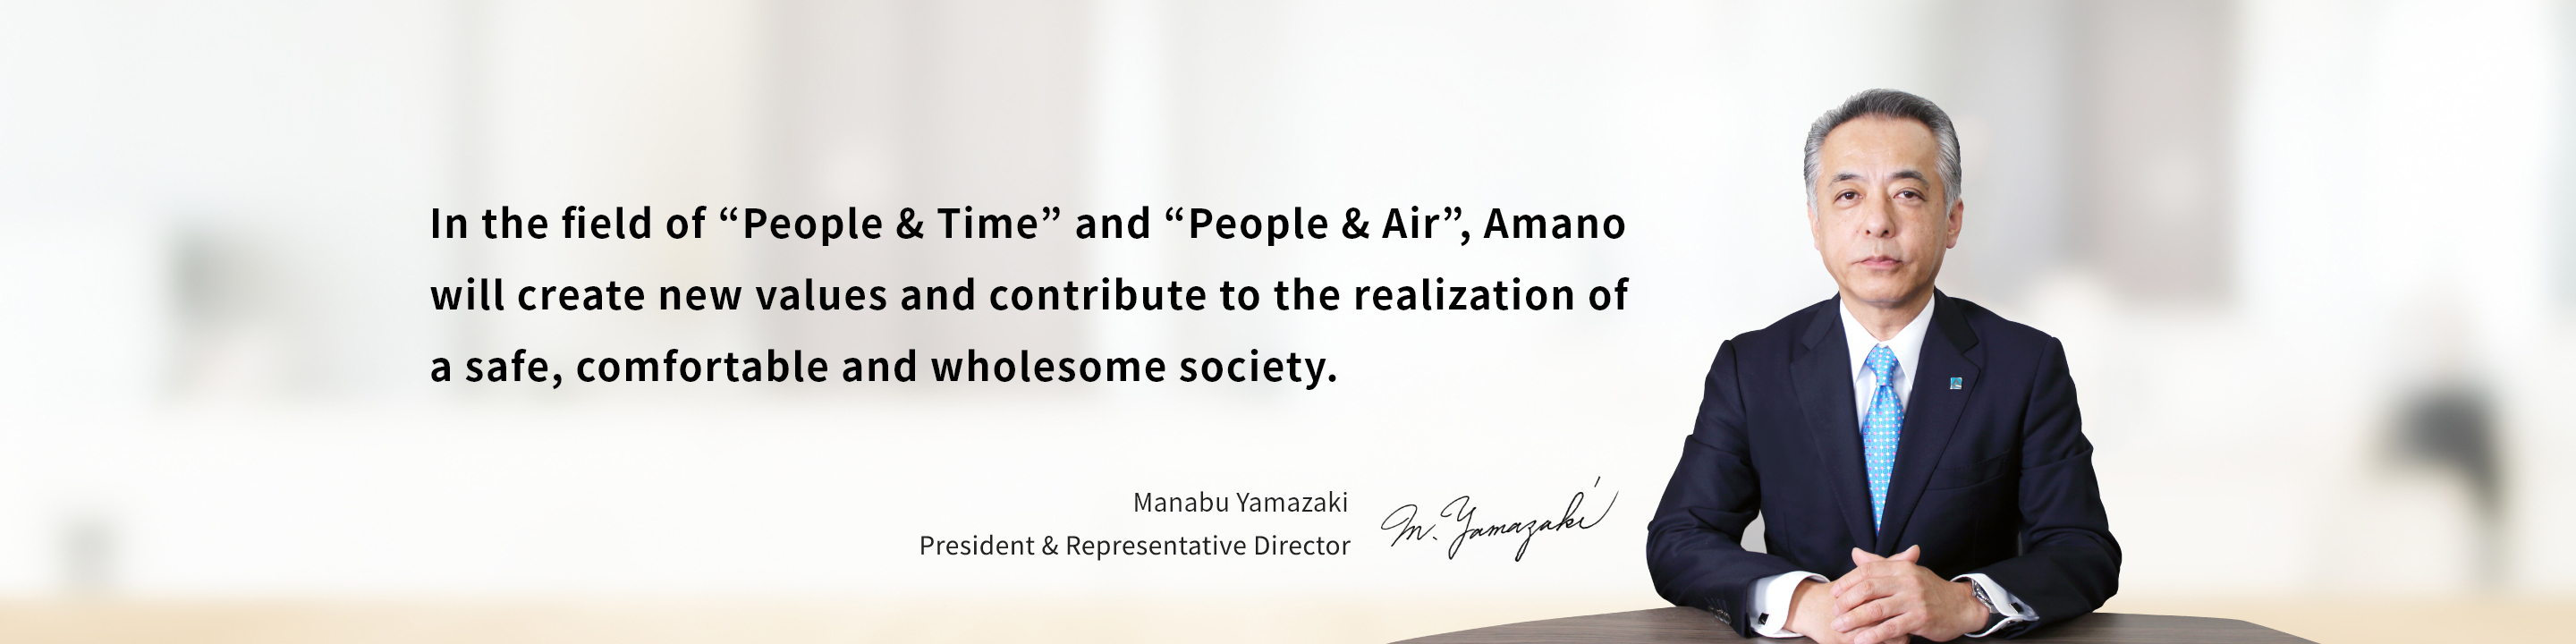 In the field of “People & Time” and “People & Air”, Amano will create new values and contribute to the realization of a safe, comfortable and wholesome society. President & Representative Director Manabu Yamazaki